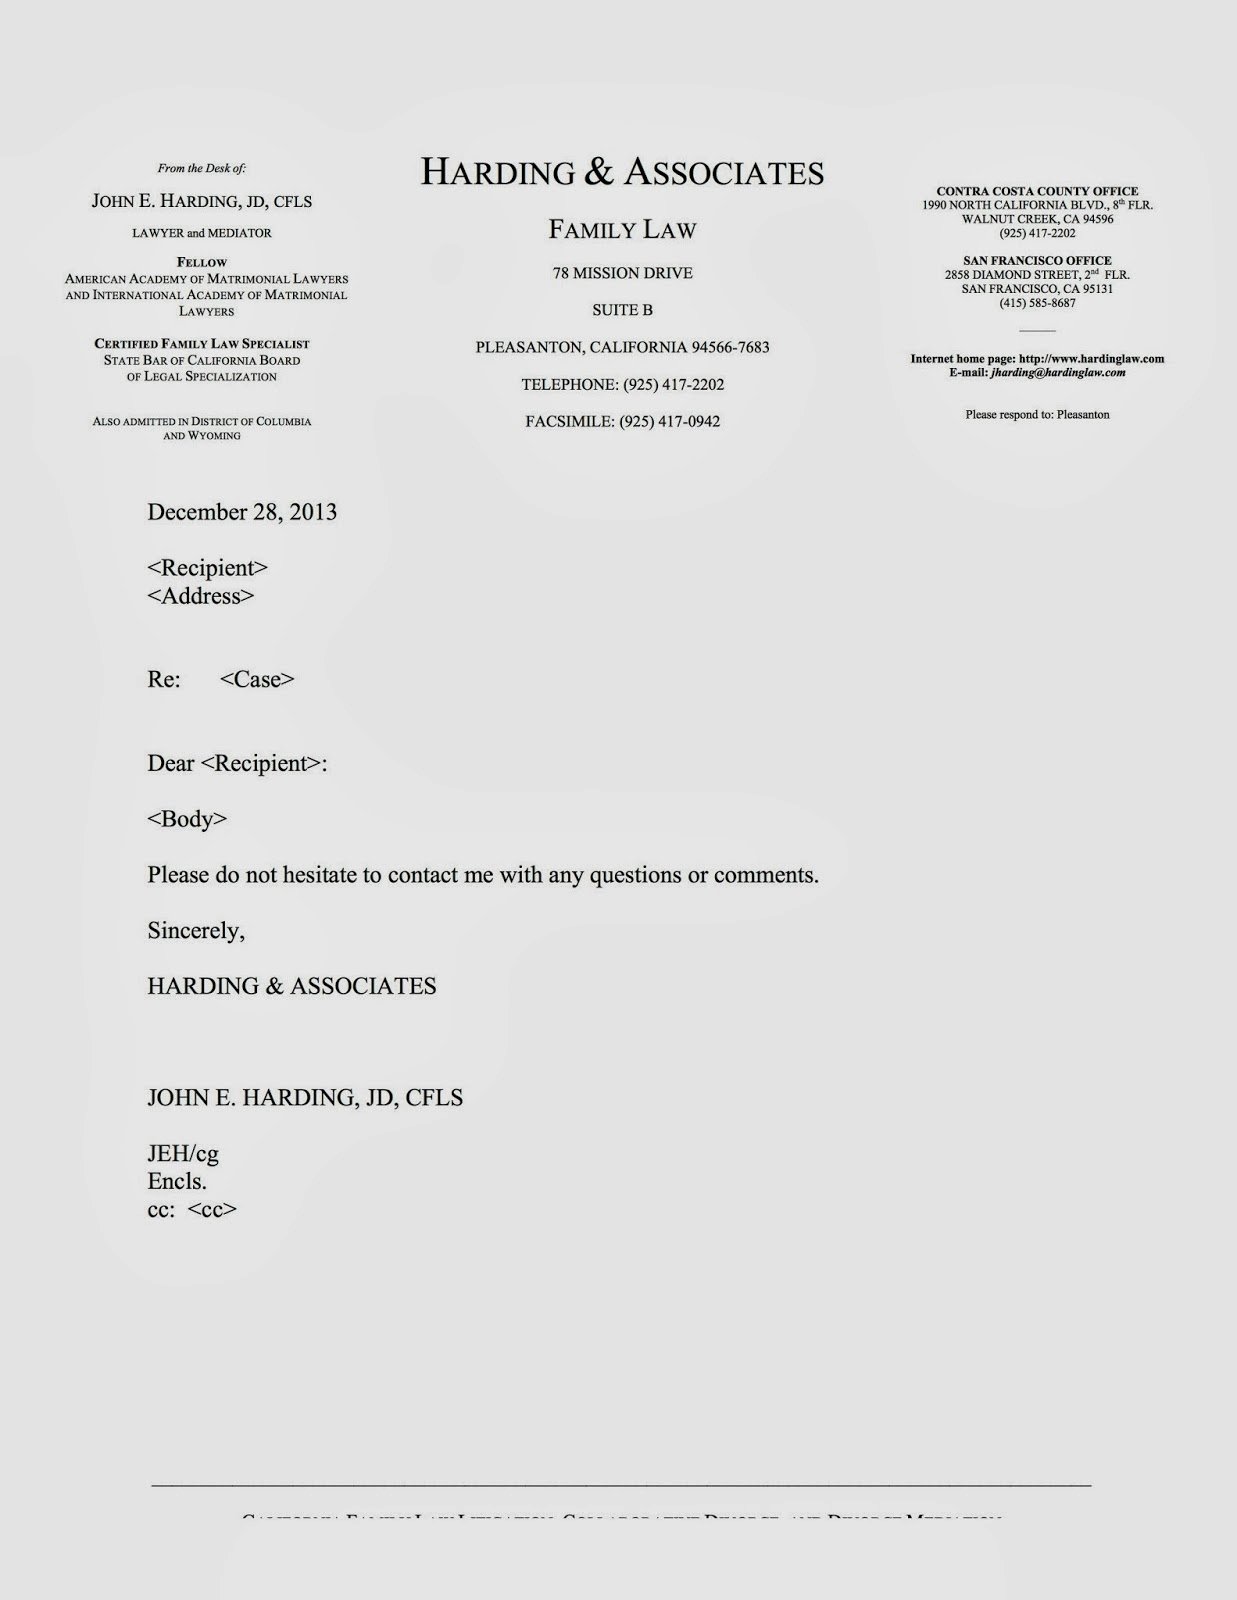 Law Firm Letterhead Template Lovely Family Law Lawyer Tech &amp; Practice 2013